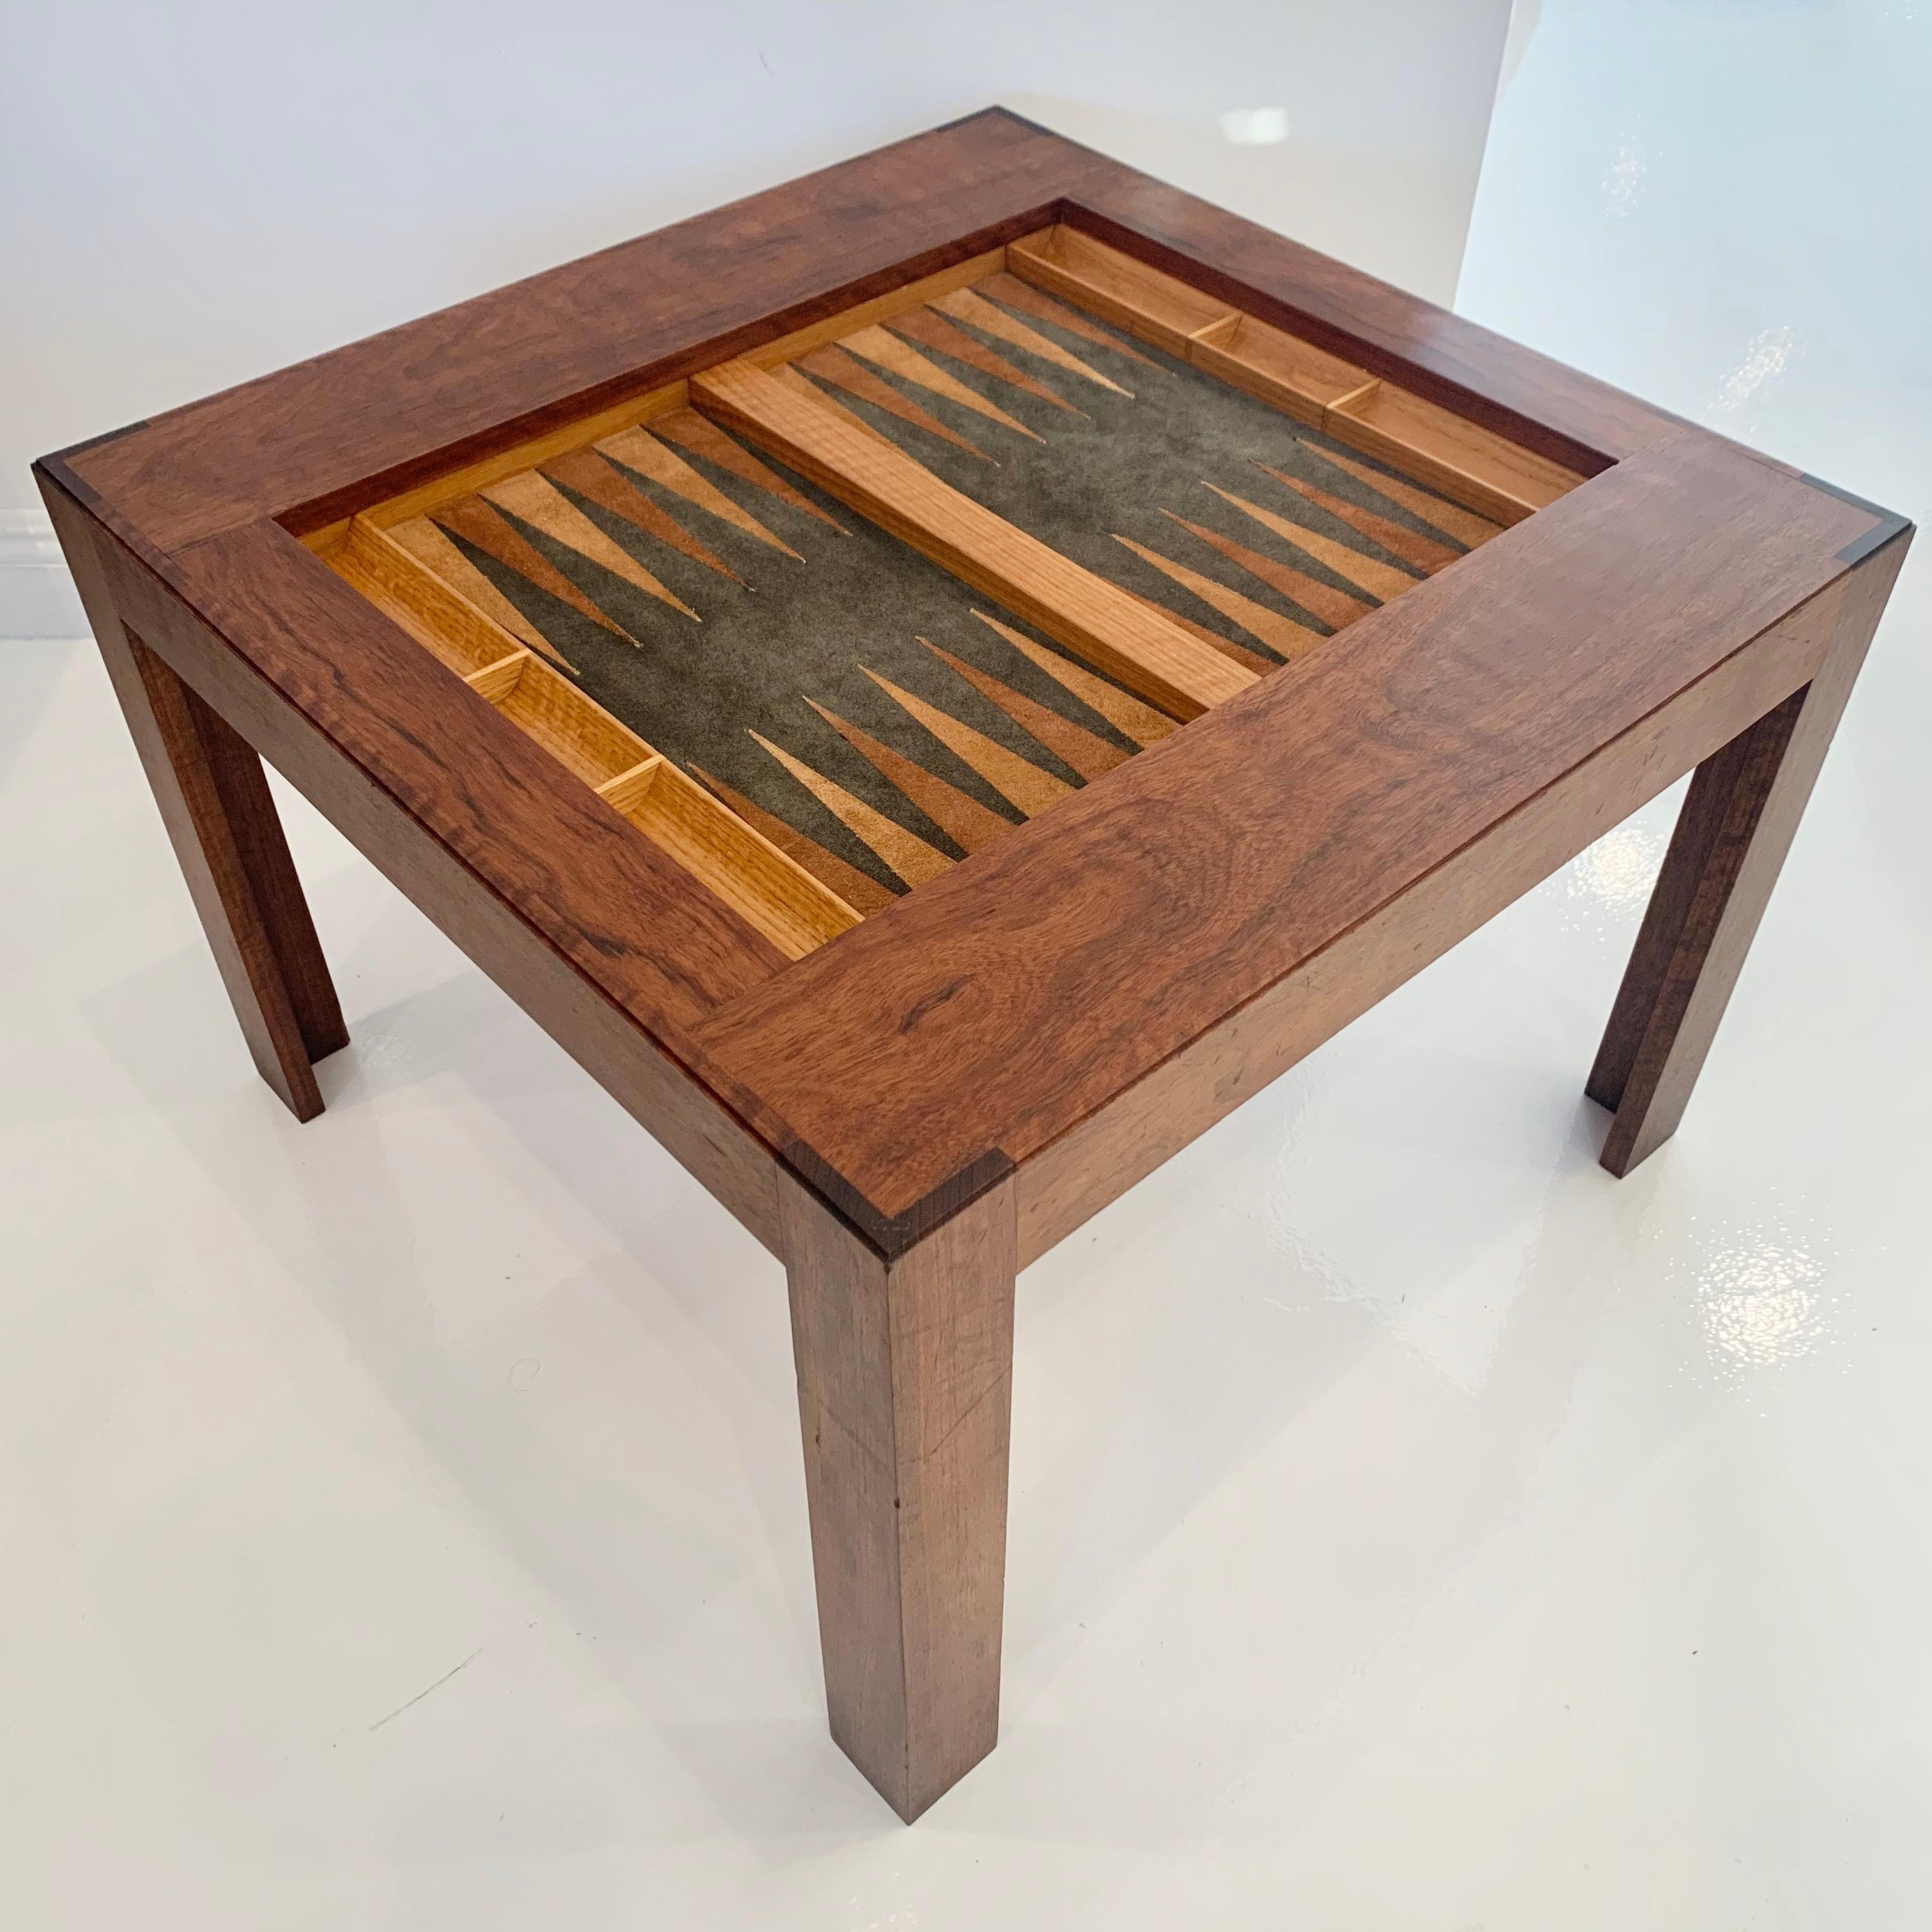 Vintage Wood and Suede Backgammon Table For Sale at 1stDibs